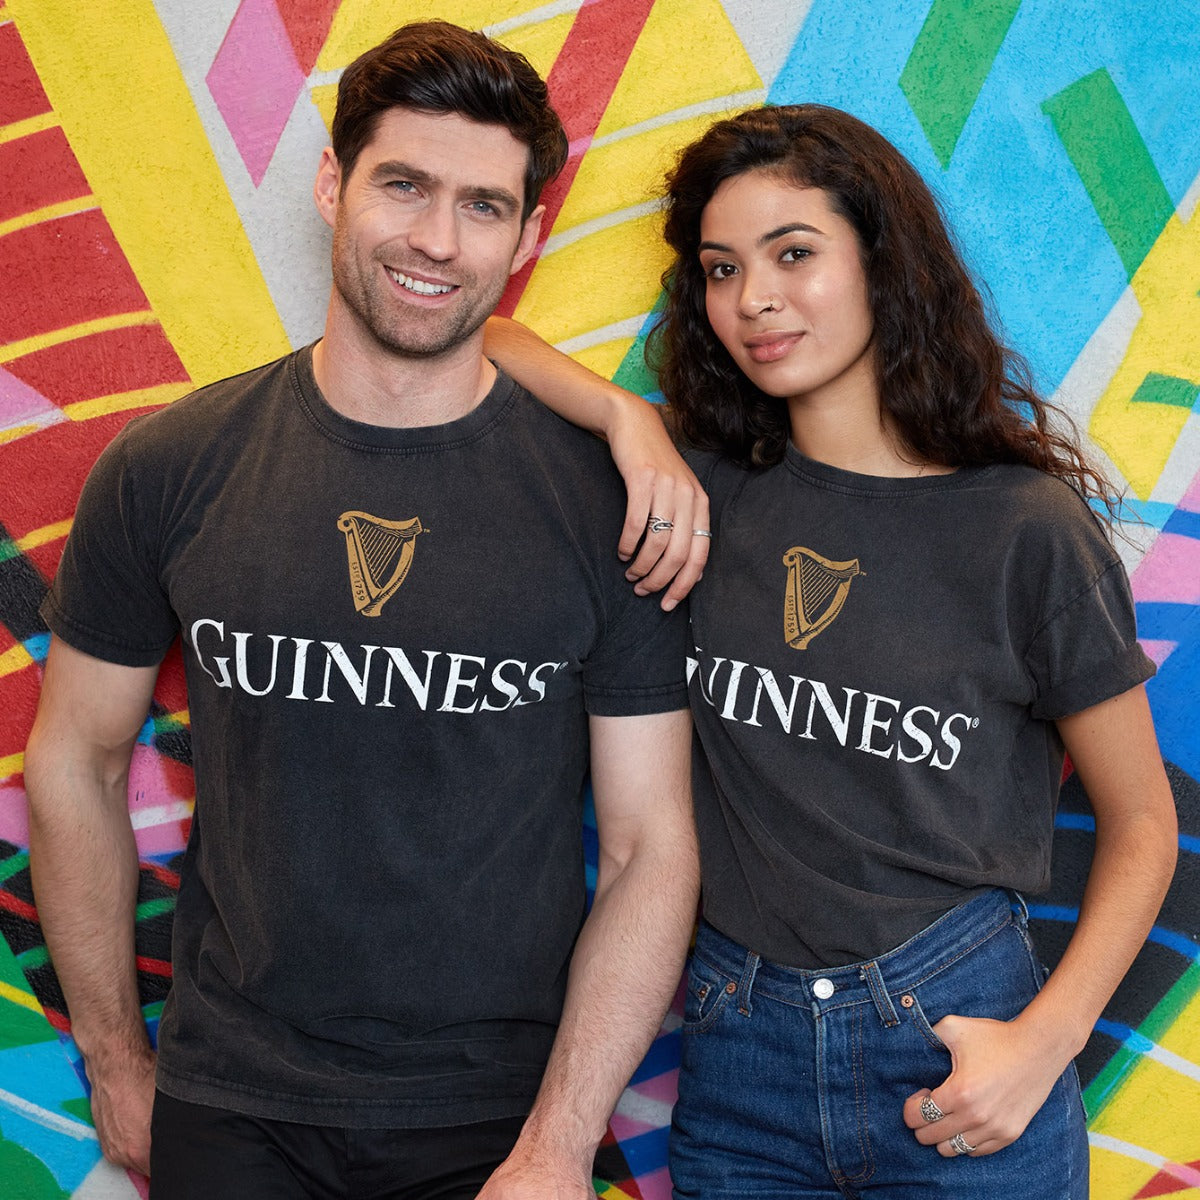 This Guinness® Distressed Trademark Label T-Shirt by Guinness features a distressed trademark label, making it the perfect choice for any Guinness enthusiast.